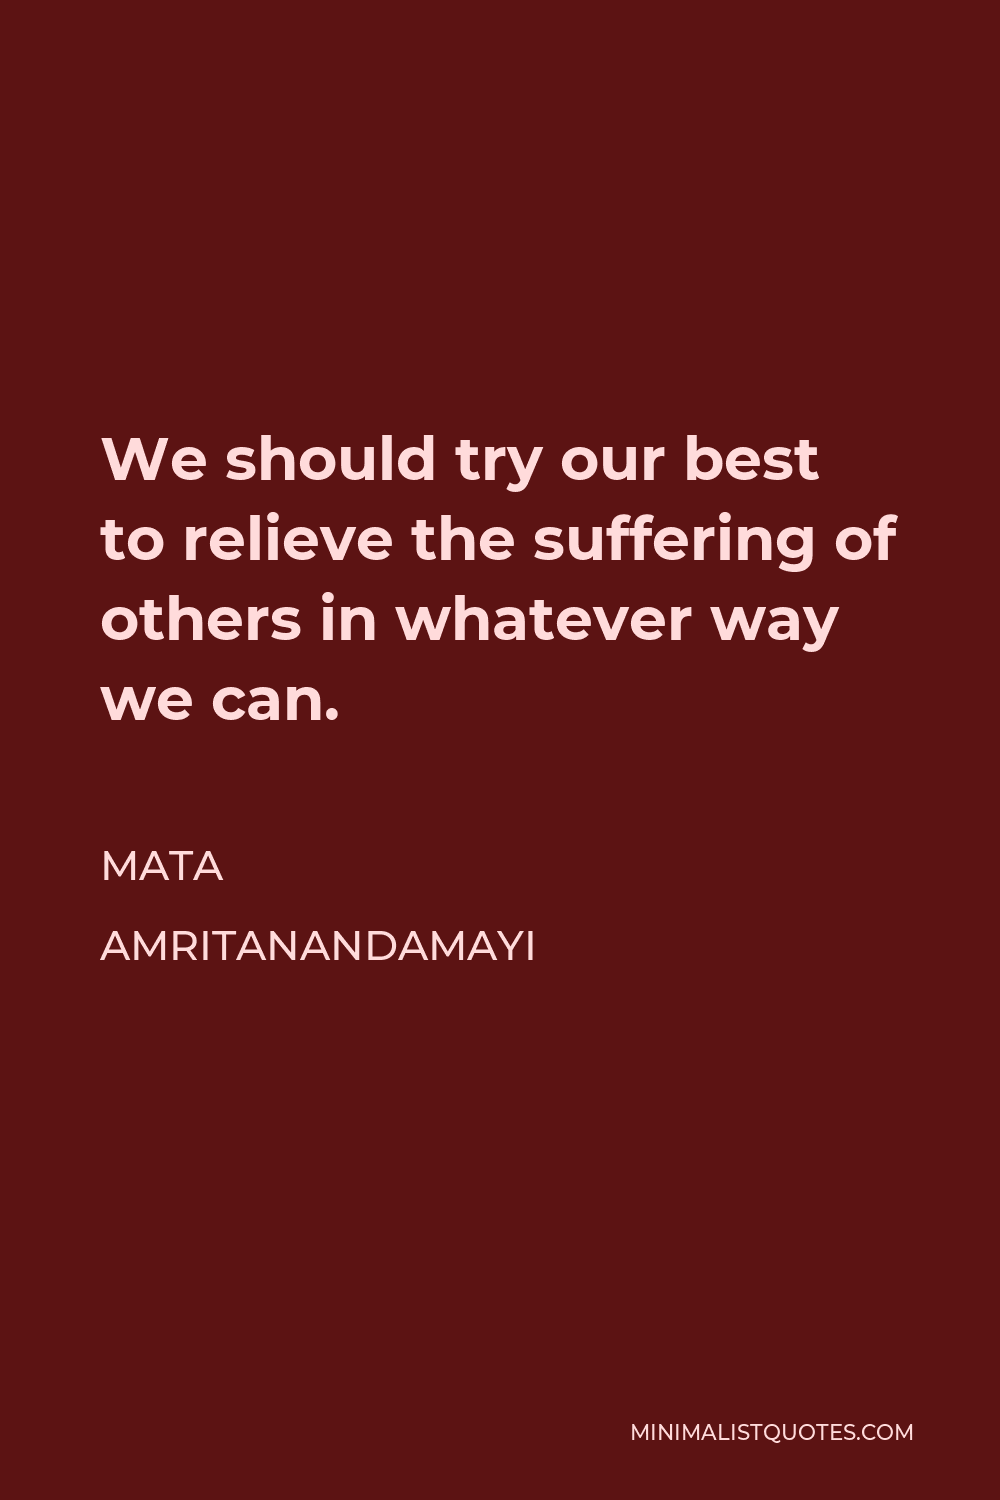 Mata Amritanandamayi Quote - We should try our best to relieve the suffering of others in whatever way we can.